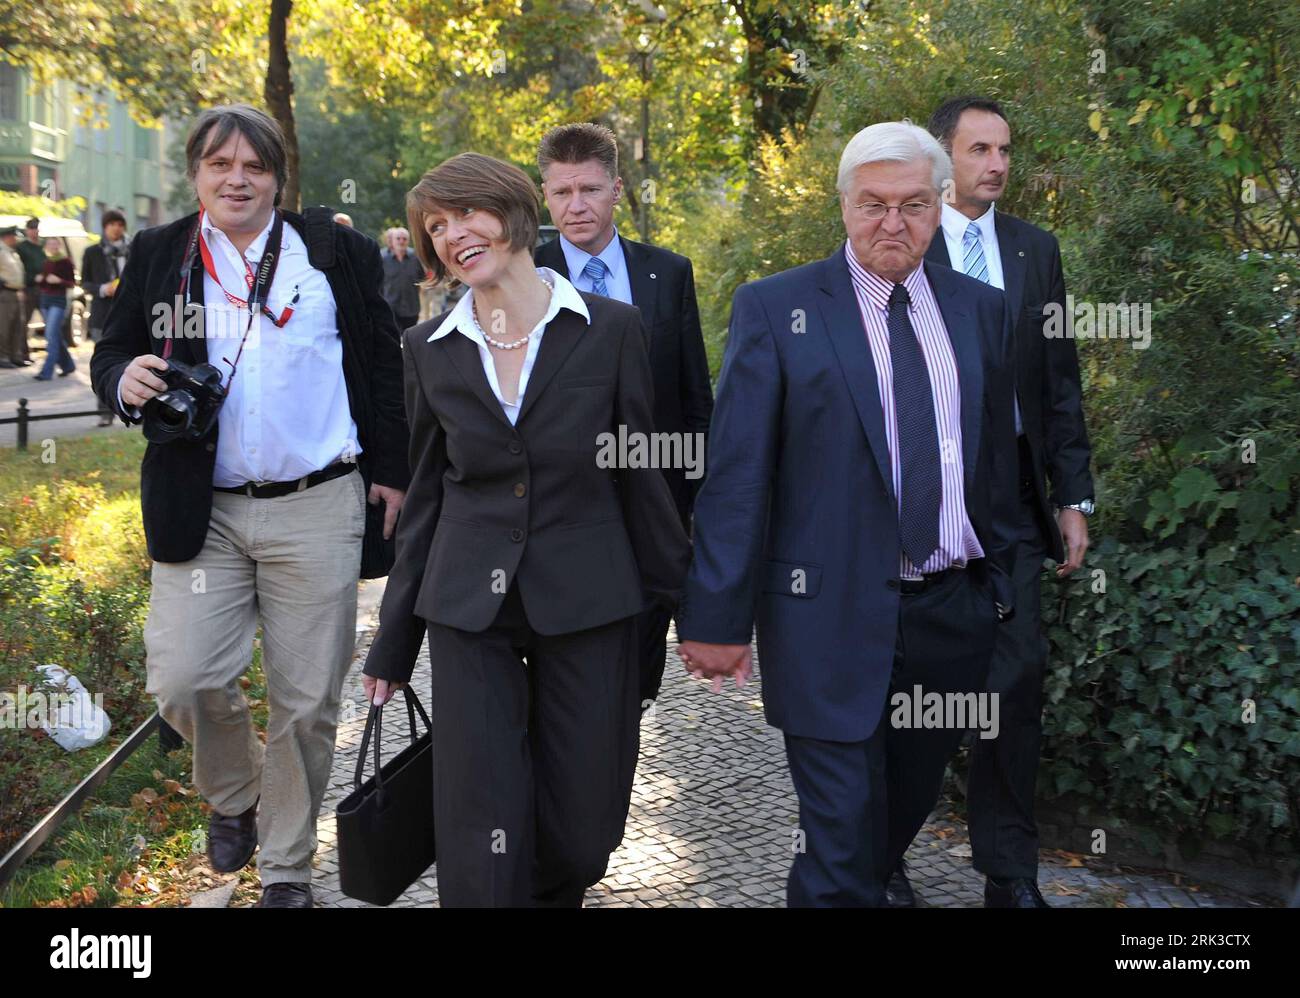 (090927) -- BERLIN, Sept. 27, 2009 (Xinhua) -- German Vice Chancellor Frank-Walter Steinmeier (R front) from the Social Democrats (SPD) and his wife Elke Büdenbender (L front) leave after casting ballots at a polling station in Berlin, capital of Germany, Sept. 27, 2009. Voters across Germany started to cast ballots at 8:00 a.m. local time (0600GMT) Sunday in the general election in which Chancellor Angela Merkel is widely considered to be re-elected. (Xinhua/Wu Wei) (zw) (14)GERMANY-POLITICS-ELECTION PUBLICATIONxNOTxINxCHN   090927 Berlin Sept 27 2009 XINHUA German Vice Chancellor Frank Walte Stock Photo